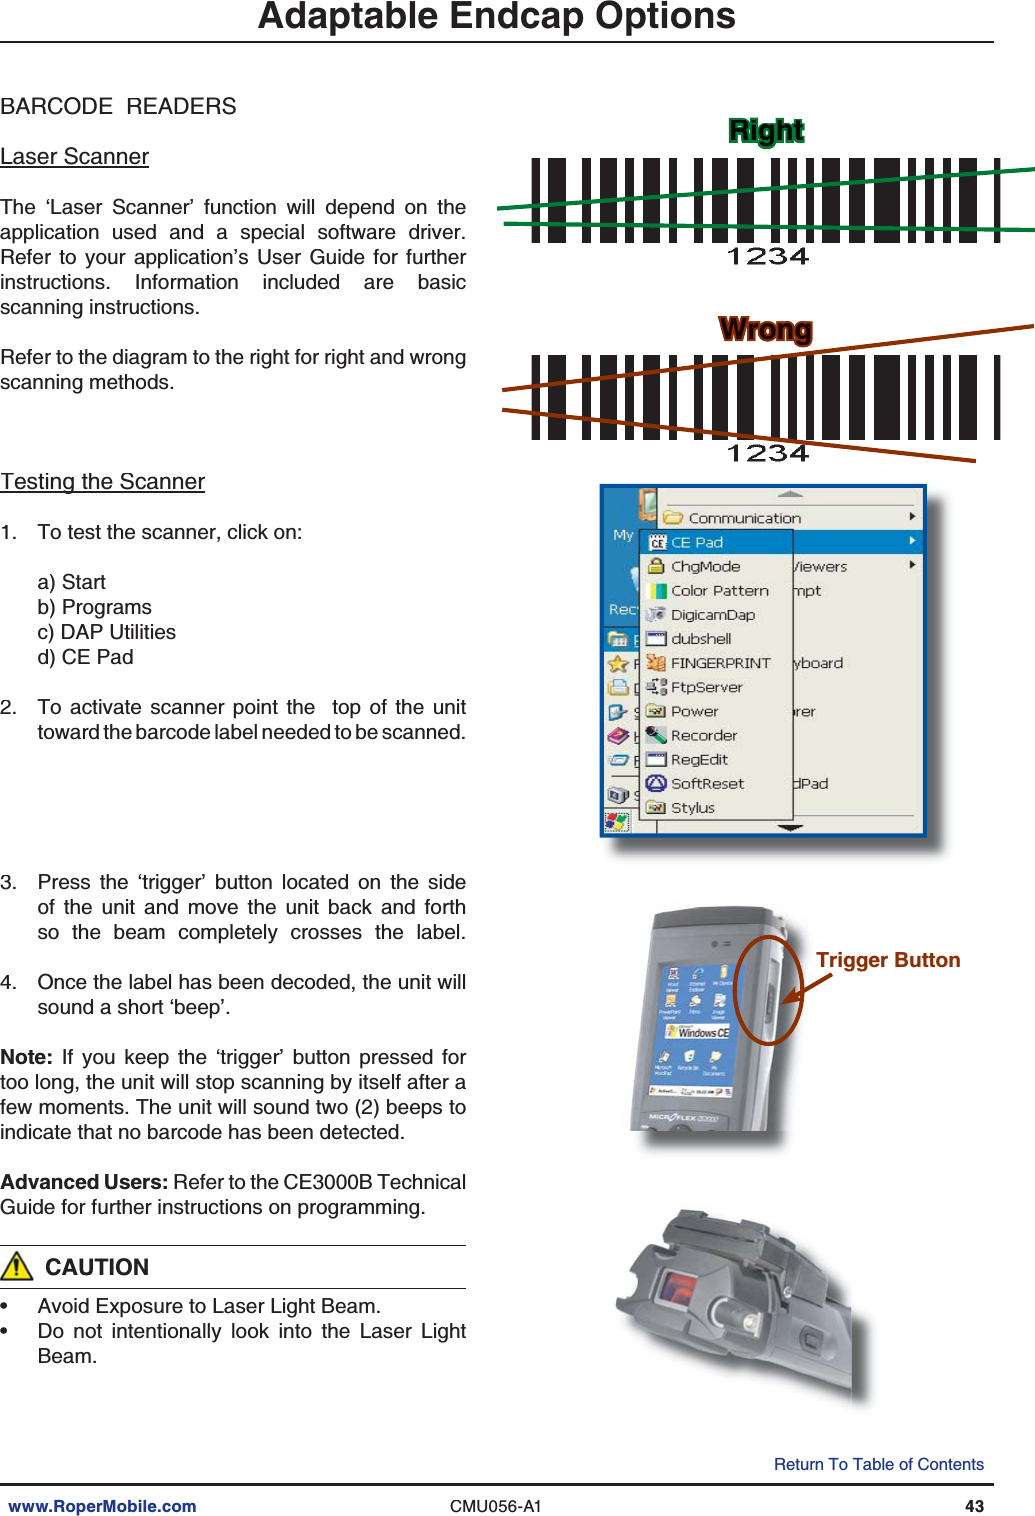 www.RoperMobile.comCMU056-A143Return To Table of ContentsBARCODE  READERSLaser ScannerThe ‘Laser Scanner’ function will depend on theapplication used and a special software driver.Refer to your application’s User Guide for furtherinstructions. Information included are basicscanning instructions.Refer to the diagram to the right for right and wrongscanning methods.Testing the ScannergTo test the scanner, click on:a) Startb) Programsc) DAP Utilitiesd) CE PadTo activate scanner point the  top of the unittoward the barcode label needed to be scanned.Press the ‘trigger’ button located on the sideof the unit and move the unit back and forthso the beam completely crosses the label.Once the label has been decoded, the unit willsound a short ‘beep’.Note: If you keep the ‘trigger’ button pressed fortoo long, the unit will stop scanning by itself after afew moments. The unit will sound two (2) beeps toindicate that no barcode has been detected.Advanced Users: Refer to the CE3000B TechnicalGuide for further instructions on programming.CAUTIONAvoid Exposure to Laser Light Beam.Do not intentionally look into the Laser LightBeam.1.2.3.4.••RghtightWrongWrorongngAdaptable Endcap OptionsTrigger Button